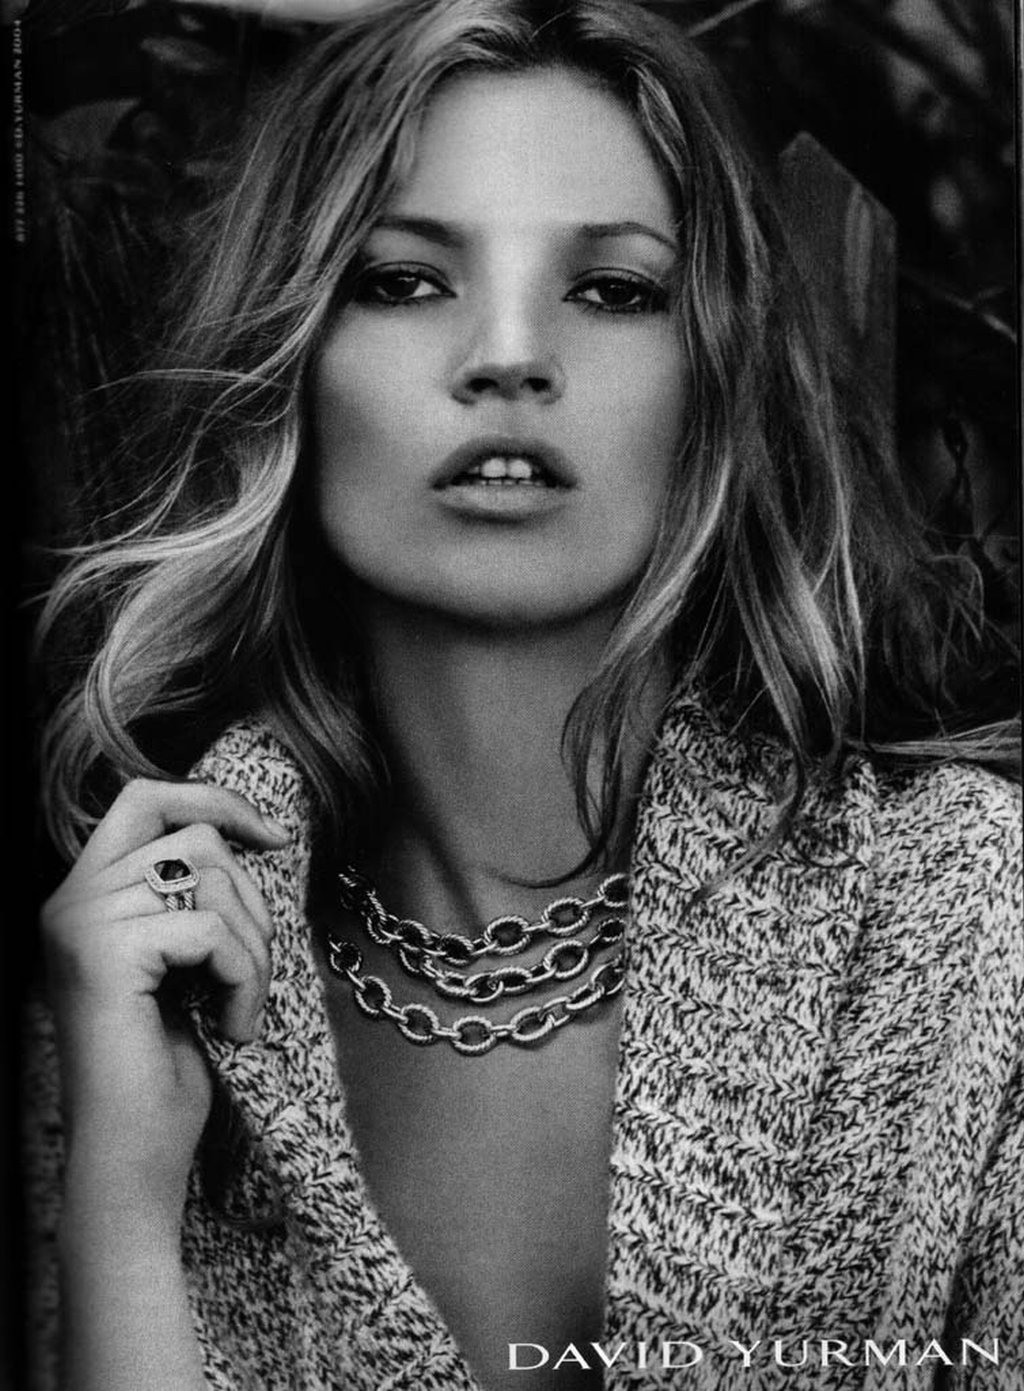 Kate Moss photo 313 of 2313 pics, wallpaper - photo #78520 - ThePlace2